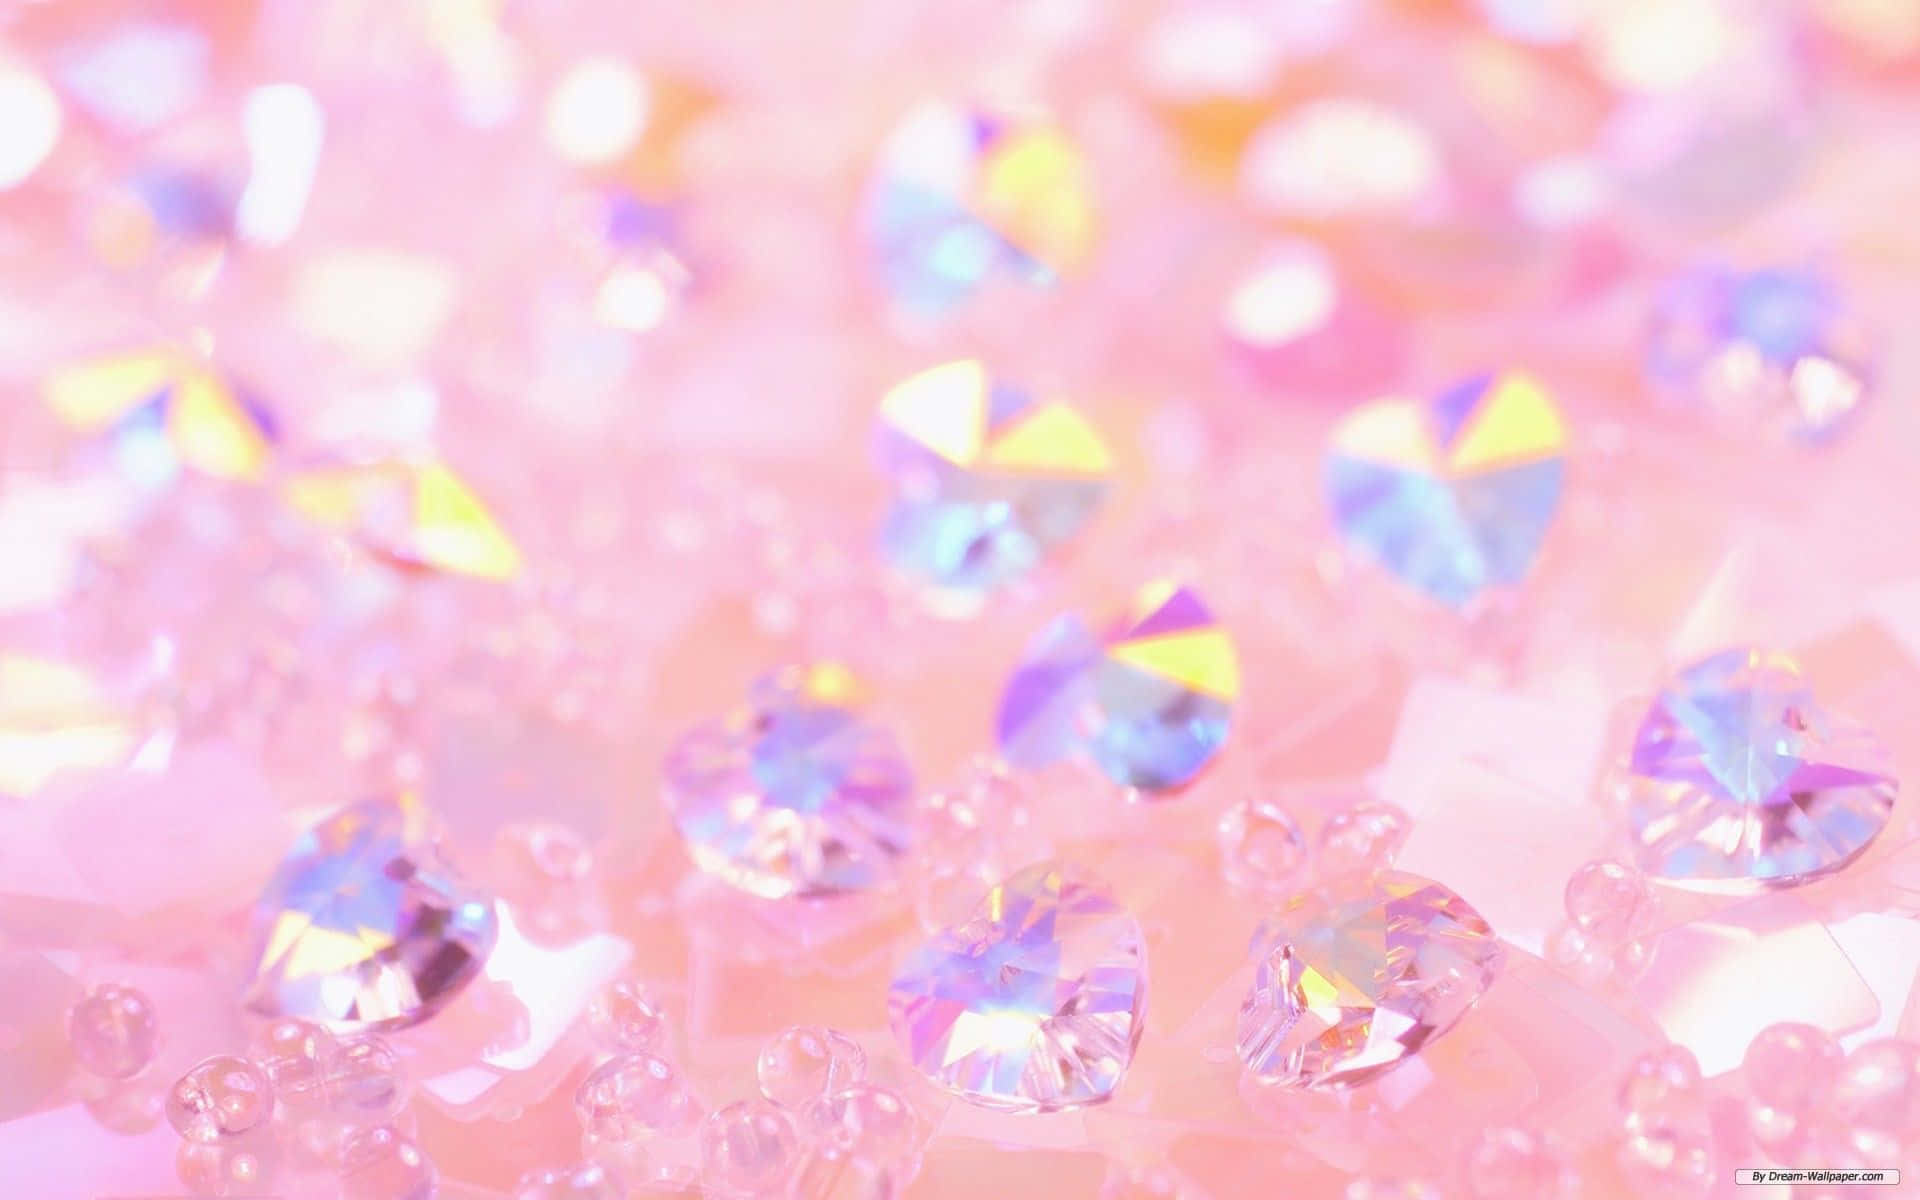 A collection of pink and purple crystals on a pink background - Diamond